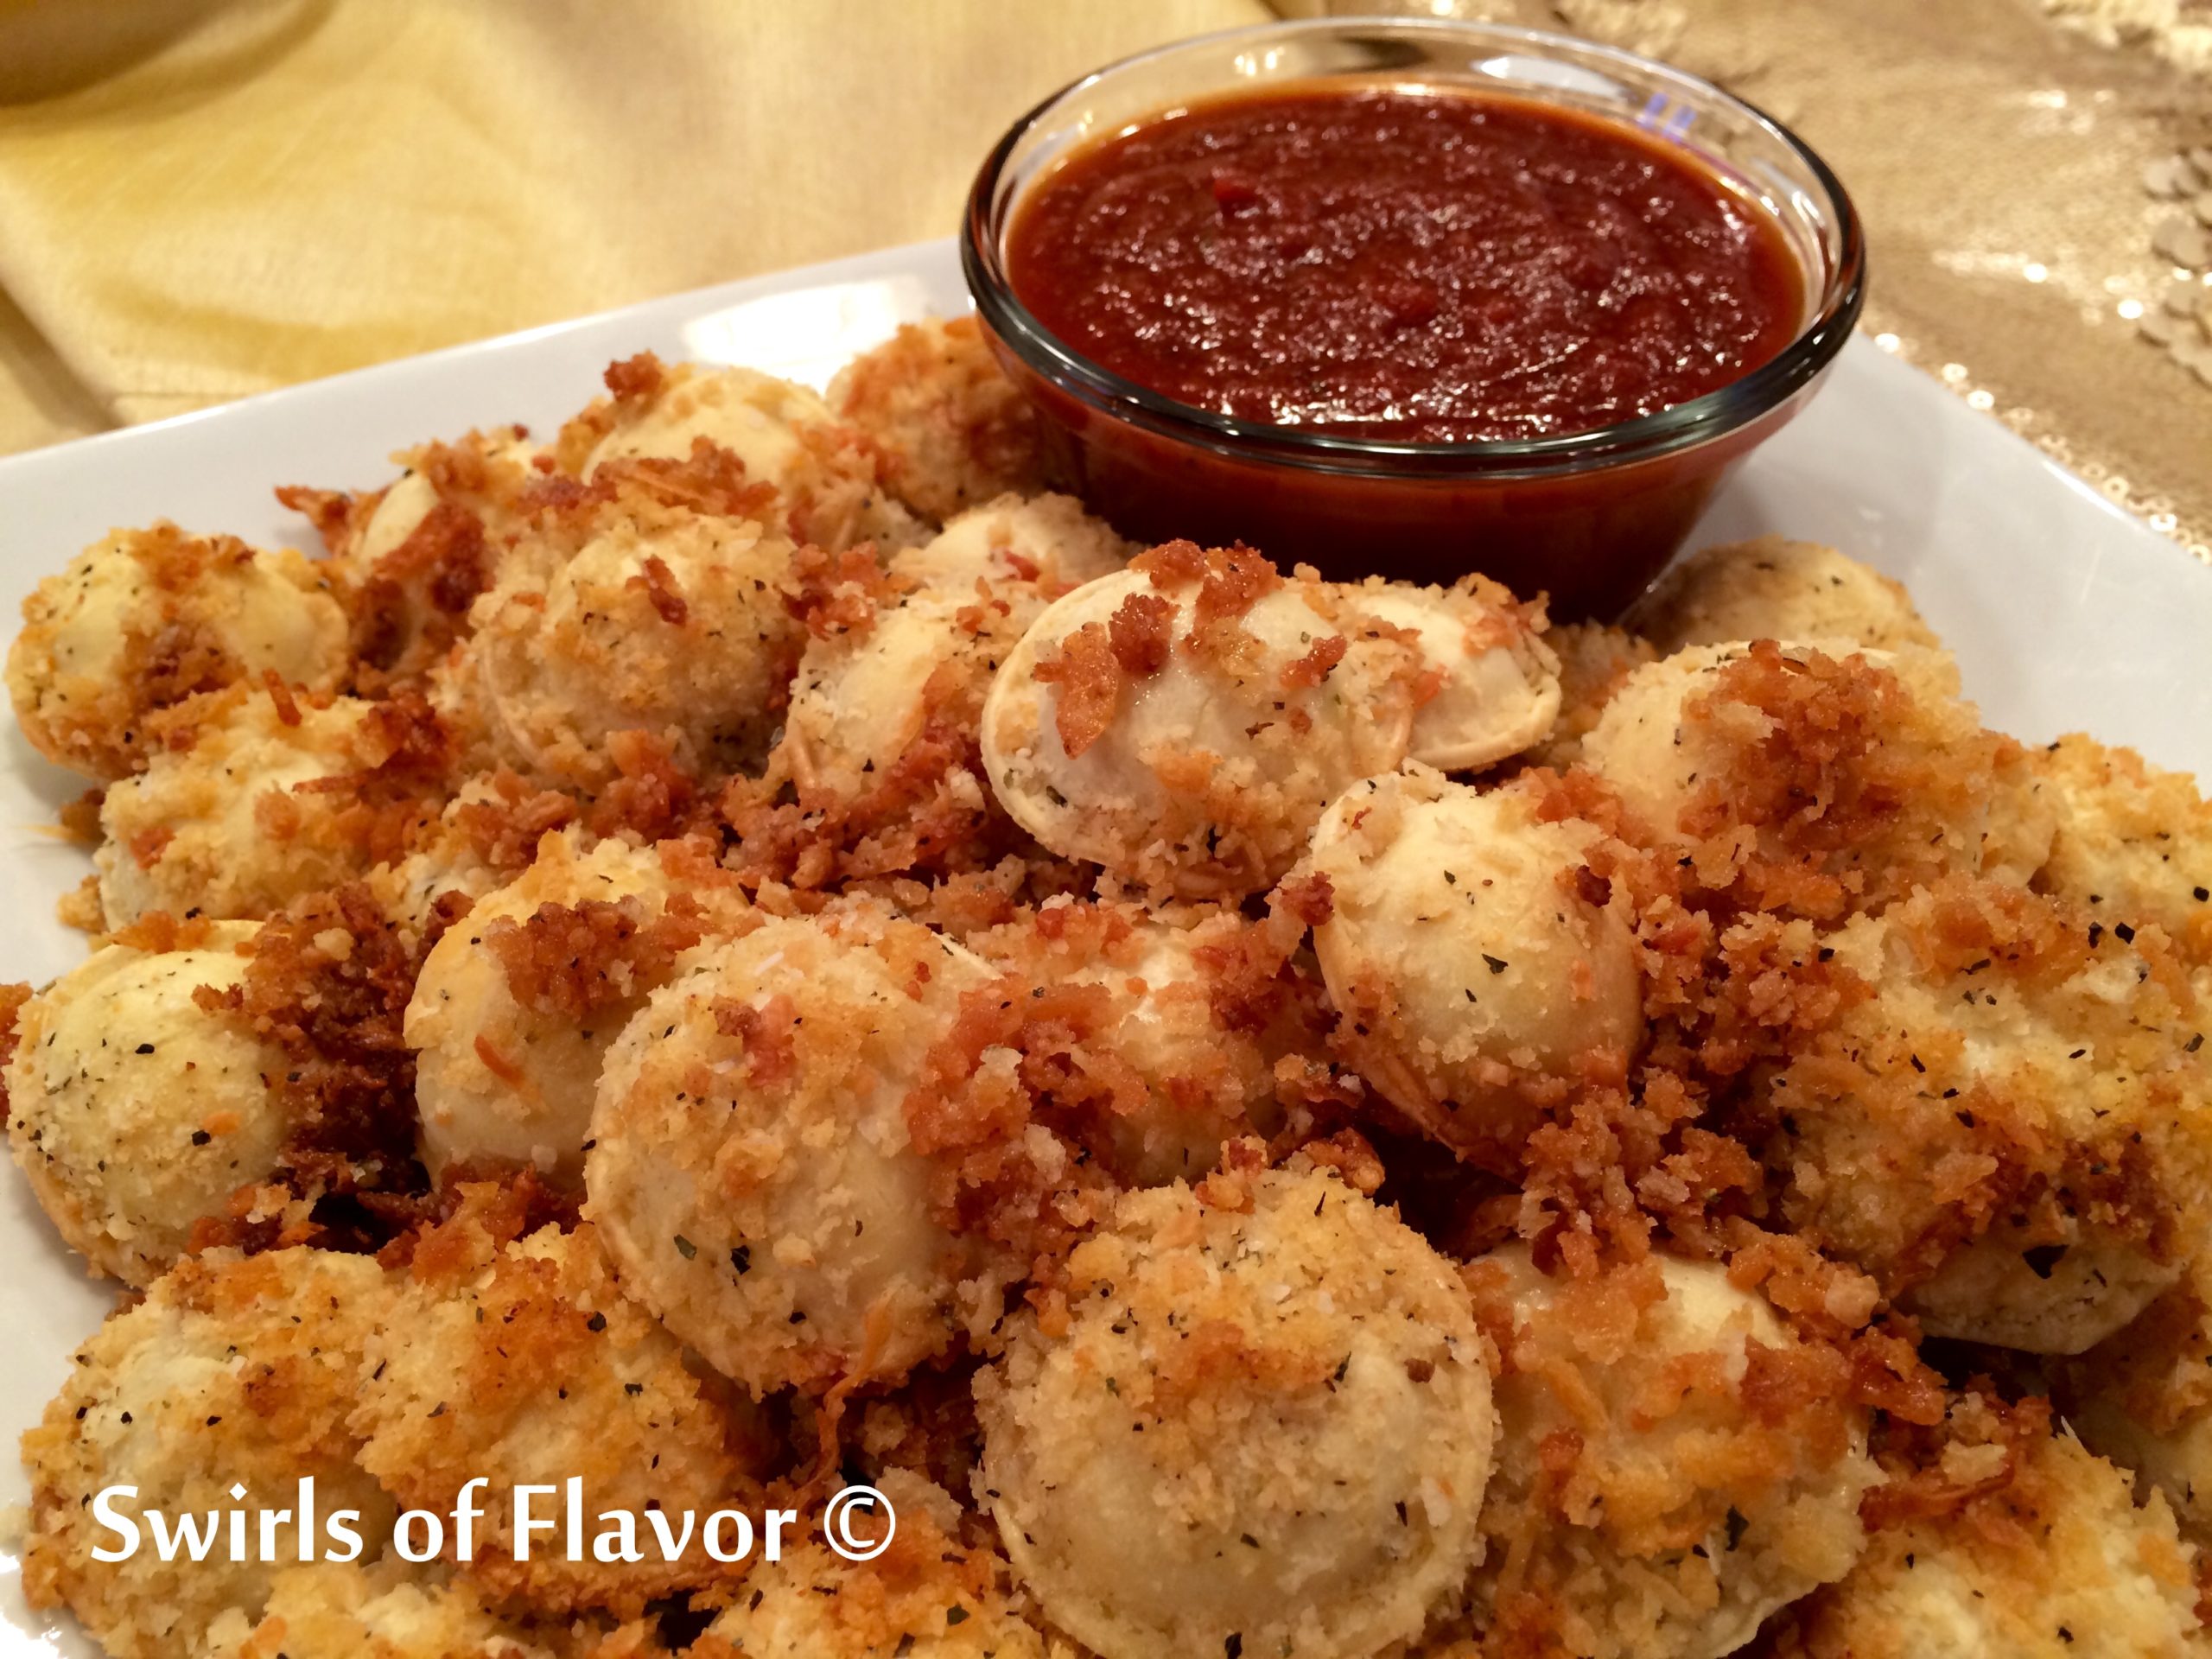 Oven-Baked Ravioli Bites With Balsamic Dipping Sauce 